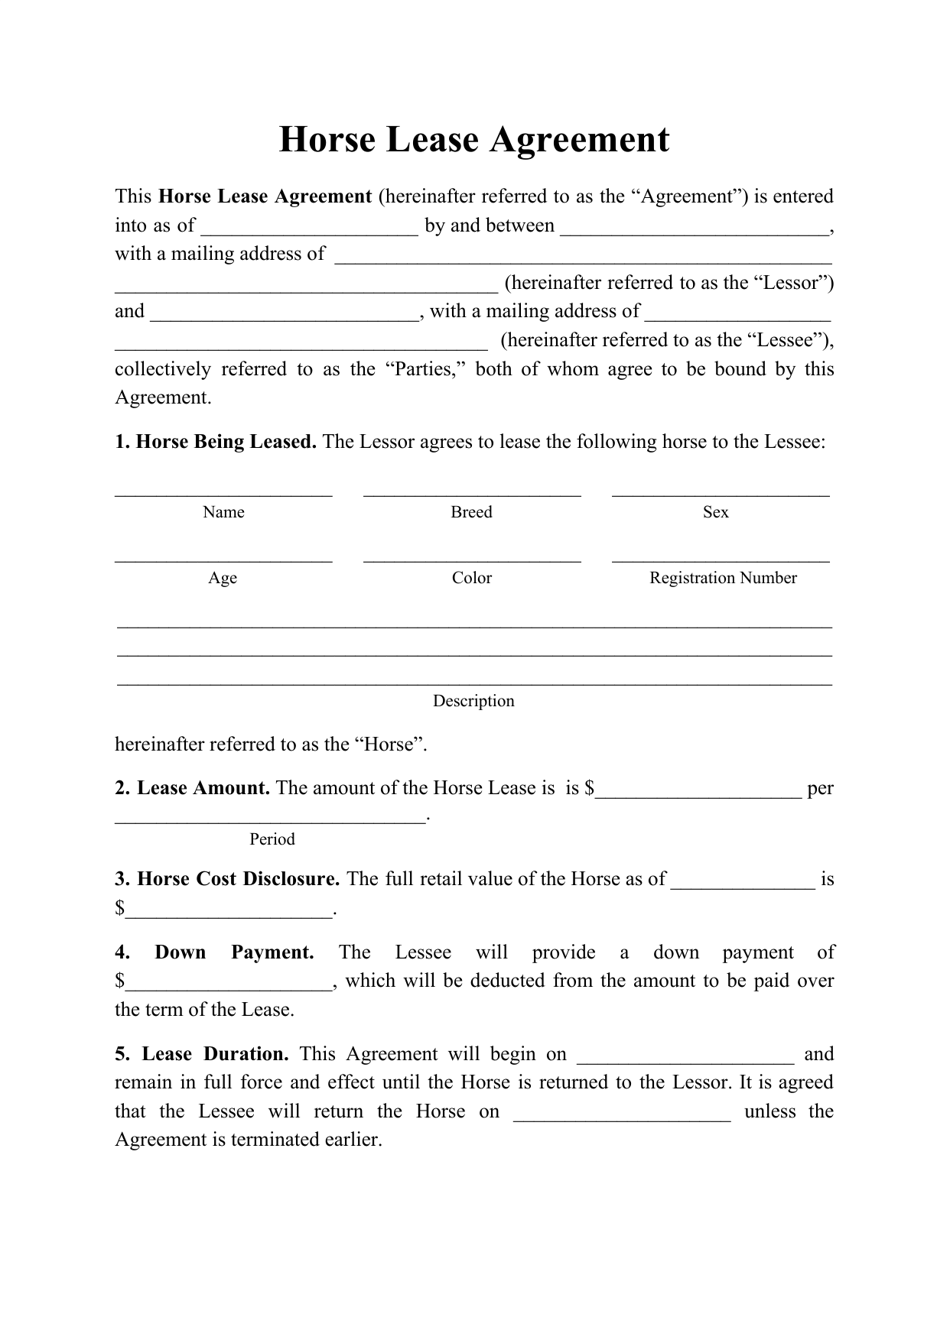 horse-lease-agreement-template-fill-out-sign-online-and-download-pdf